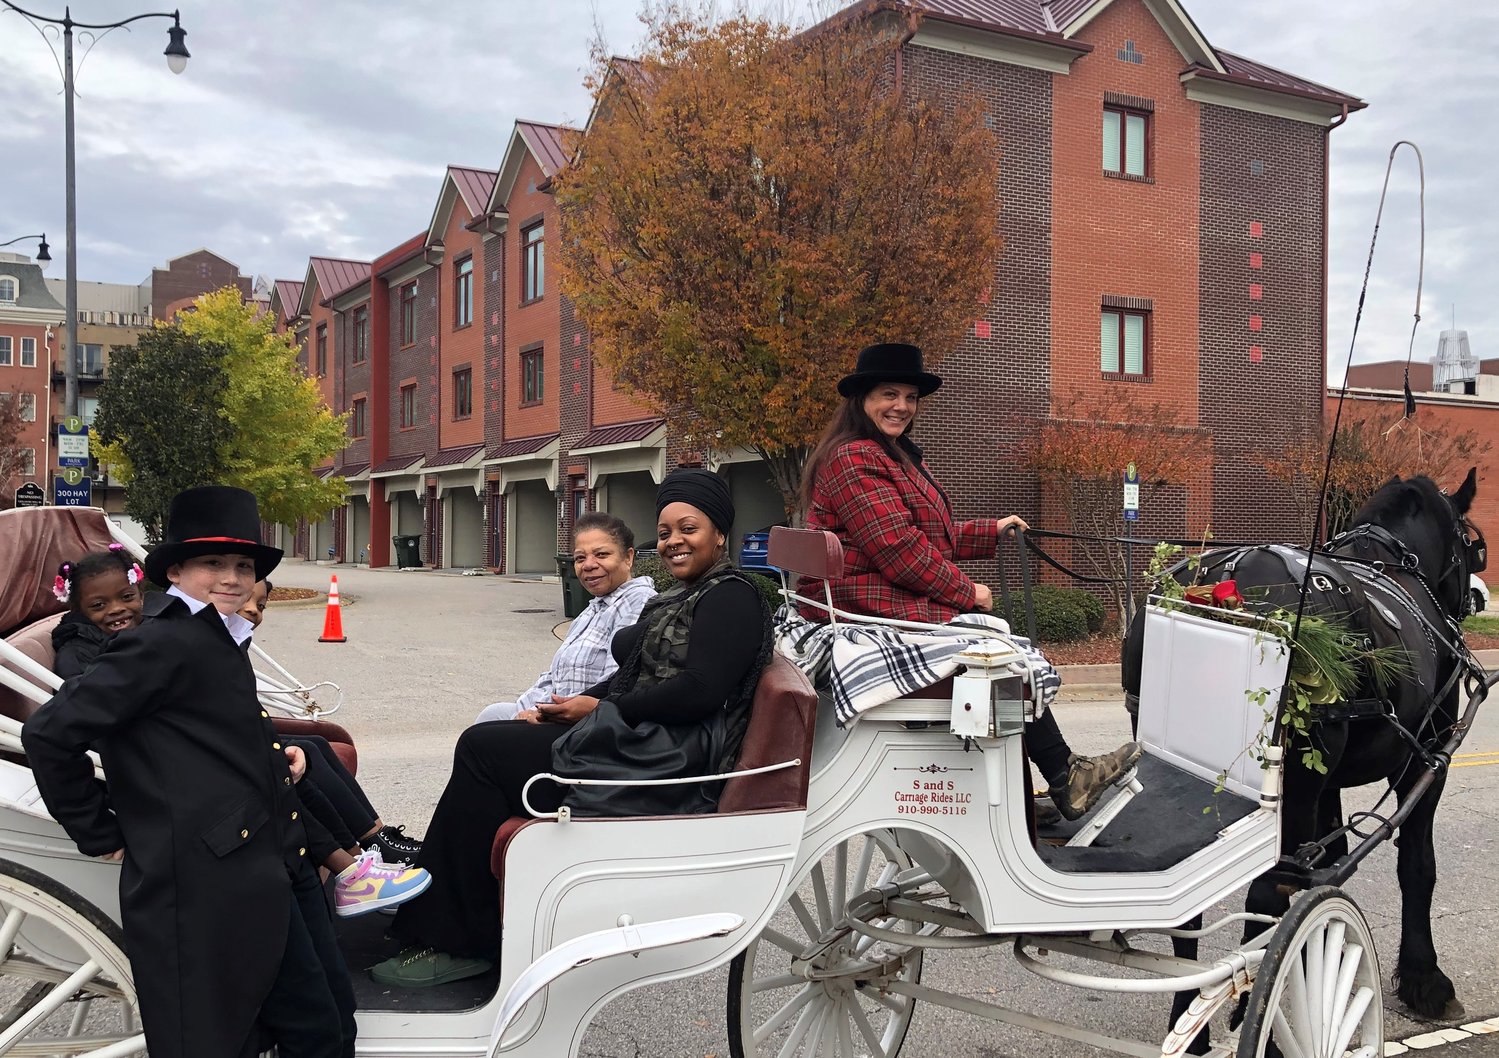 Carriage rides, sponsored by Cool Spring Downtown District, were sold out two weeks in advance. Scouts from Troop 747, like this young man, were able coachman’s assistants.